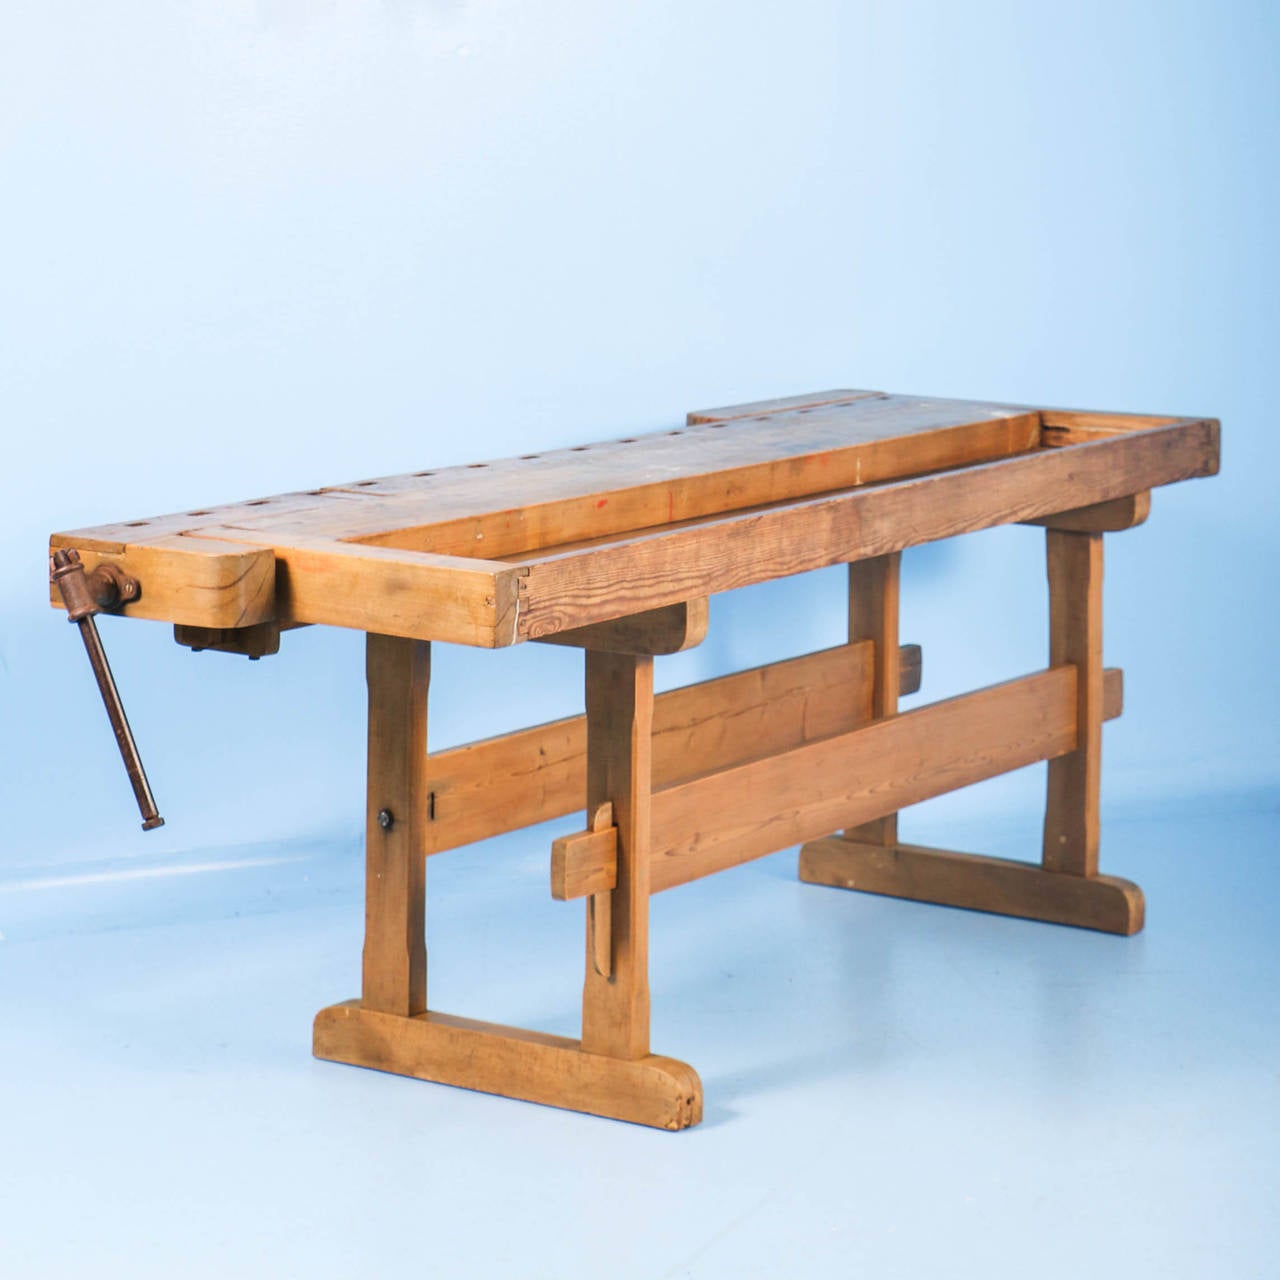 The soft pine patina on this workbench comes from the years of constant use. It has two vices and a recessed tray where the carpenter would lay his tools. Some residual paint remains of projects from years past. The traditional trestle base allowed